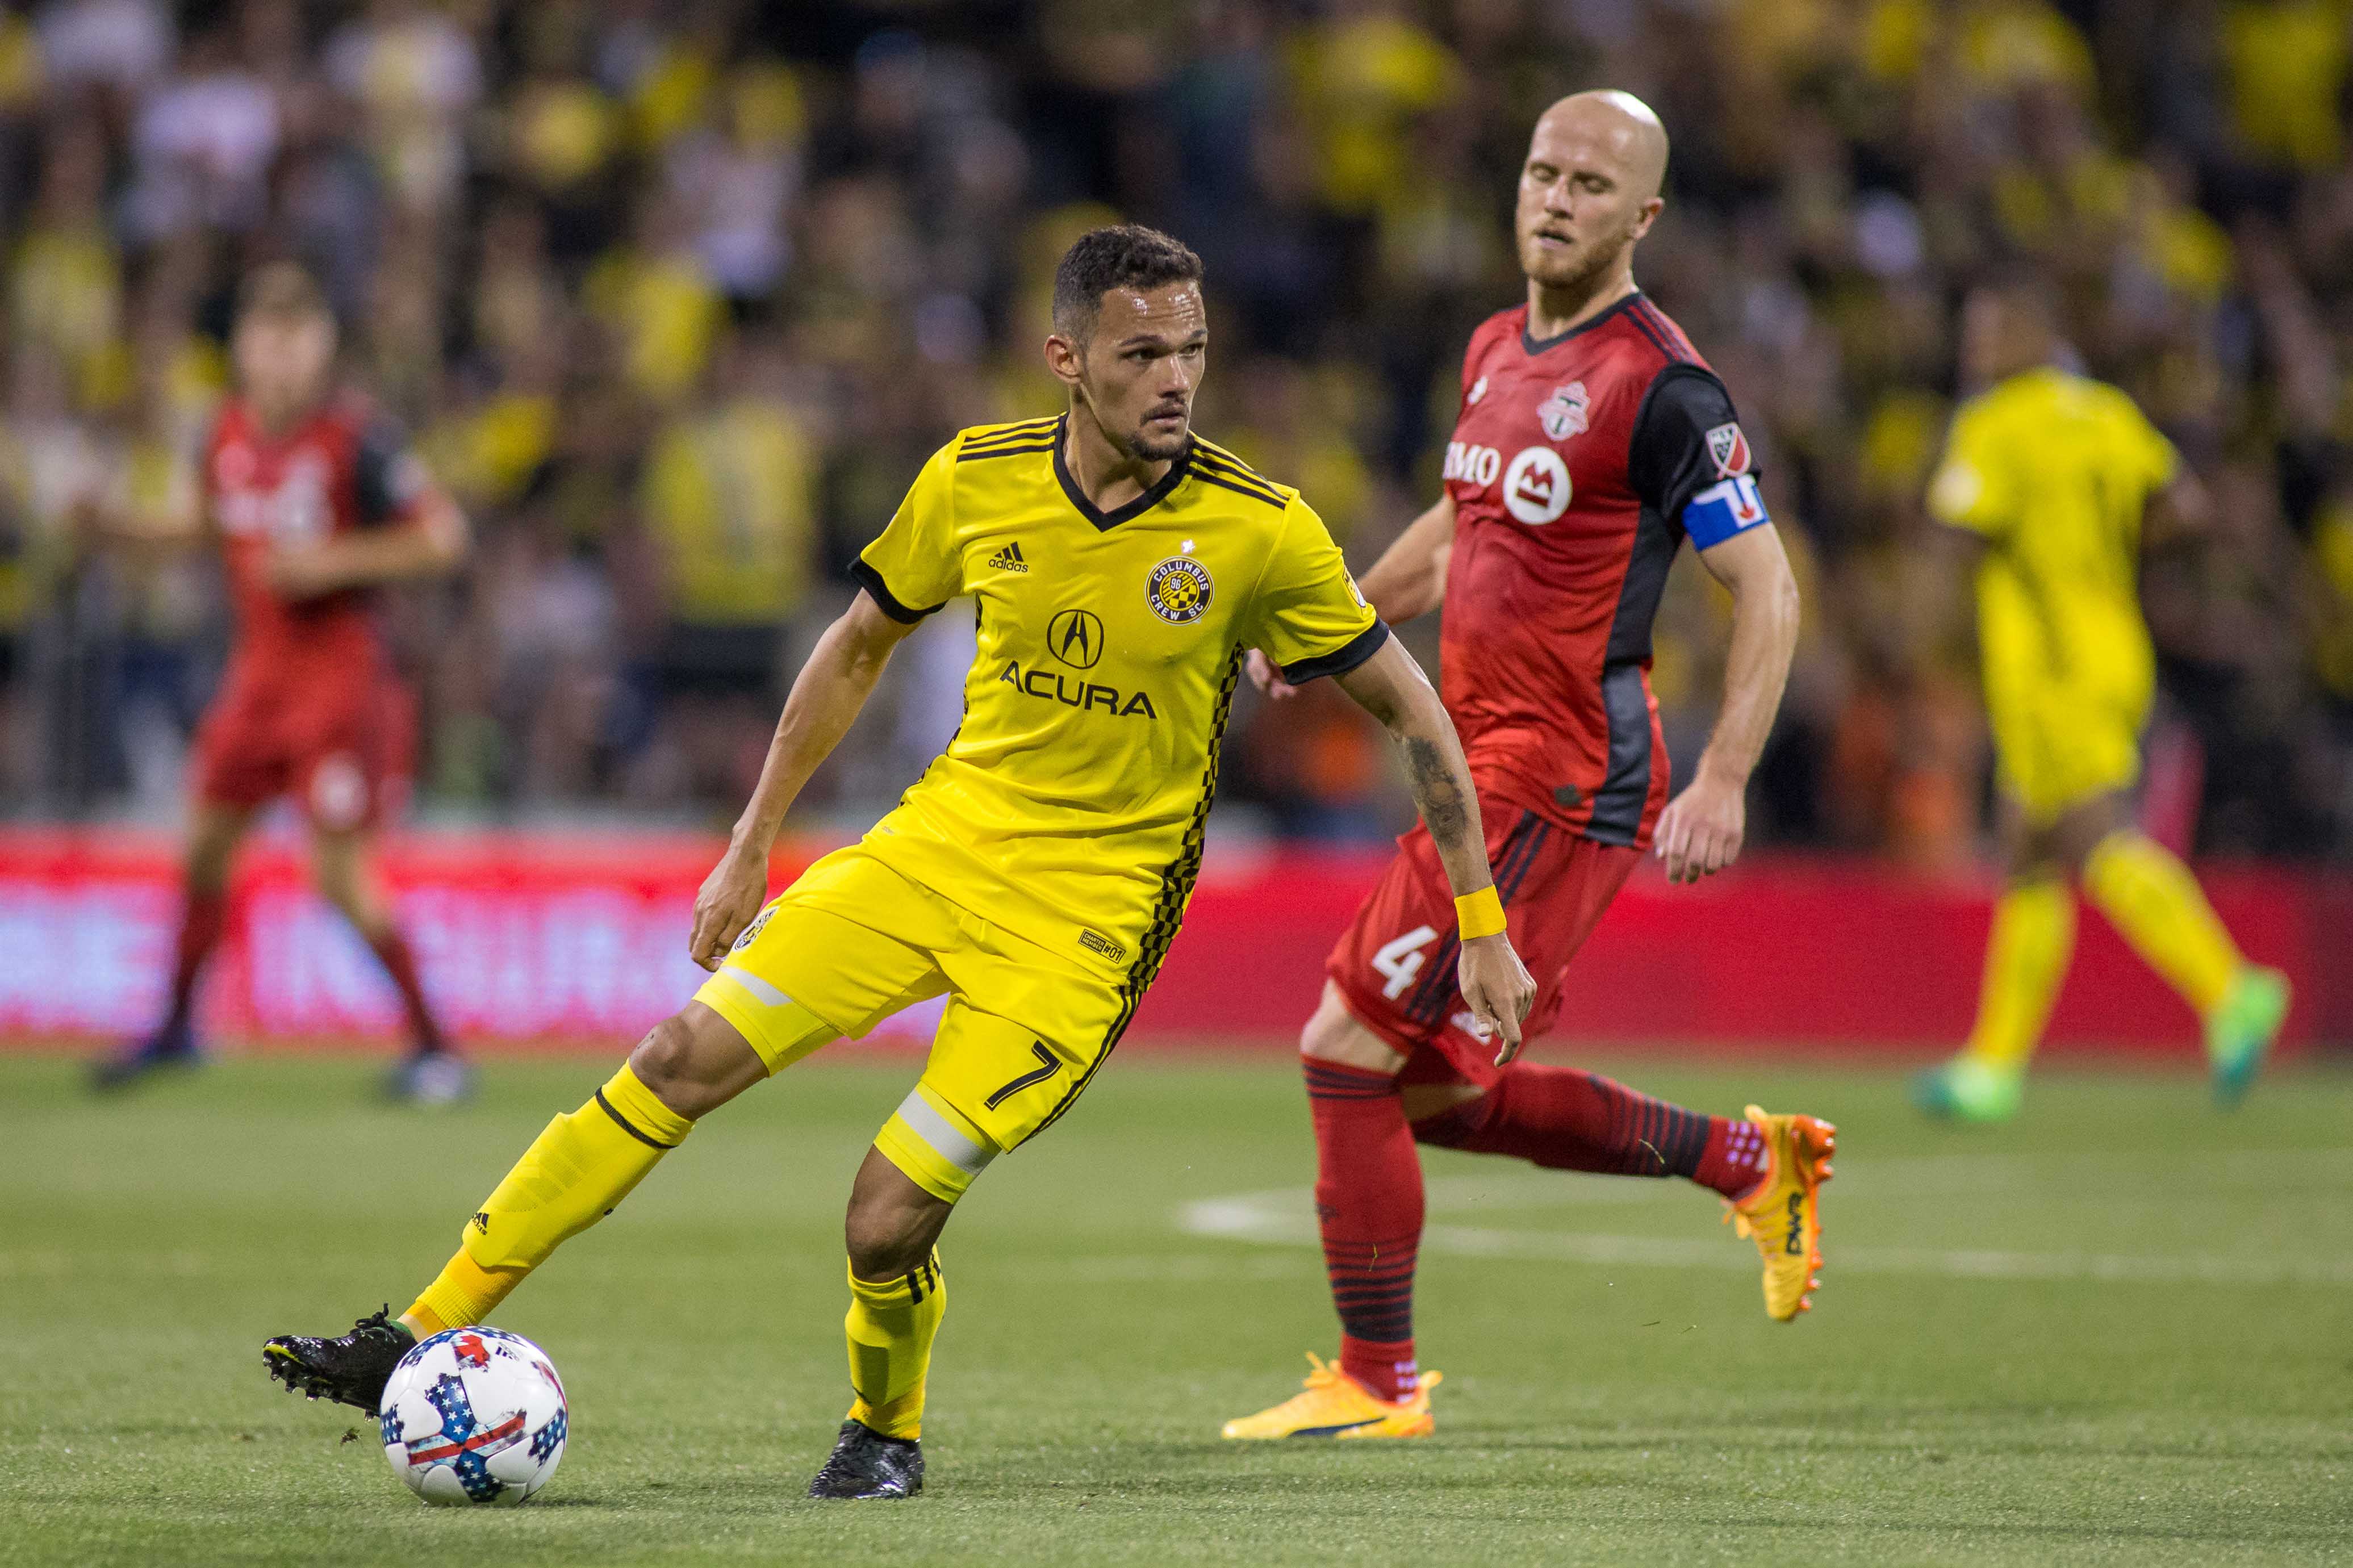 Columbus Crew vs. NYCFC Preview and How to Watch